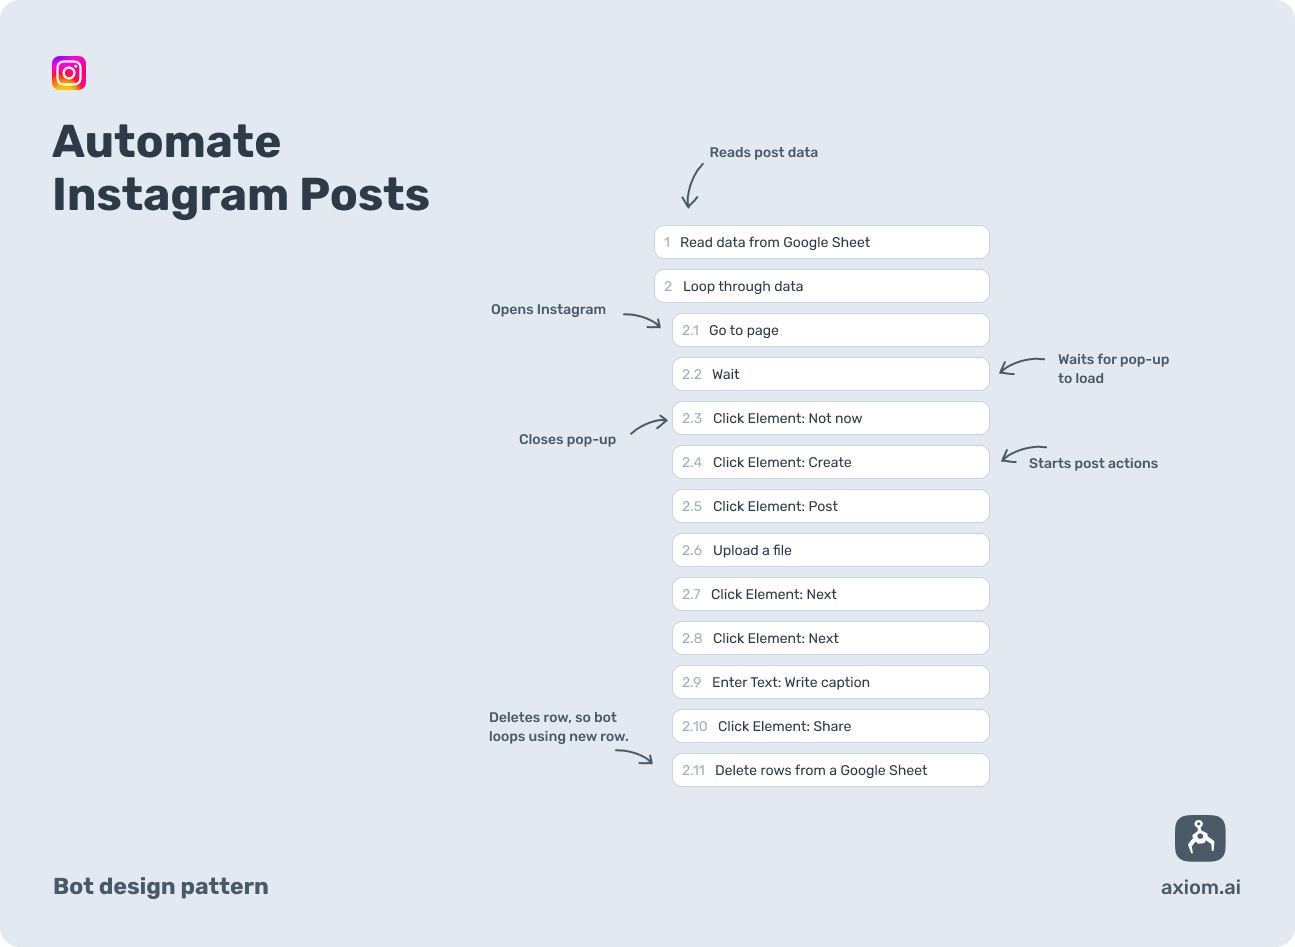 axiom.ai design pattern for automating post on Instagram